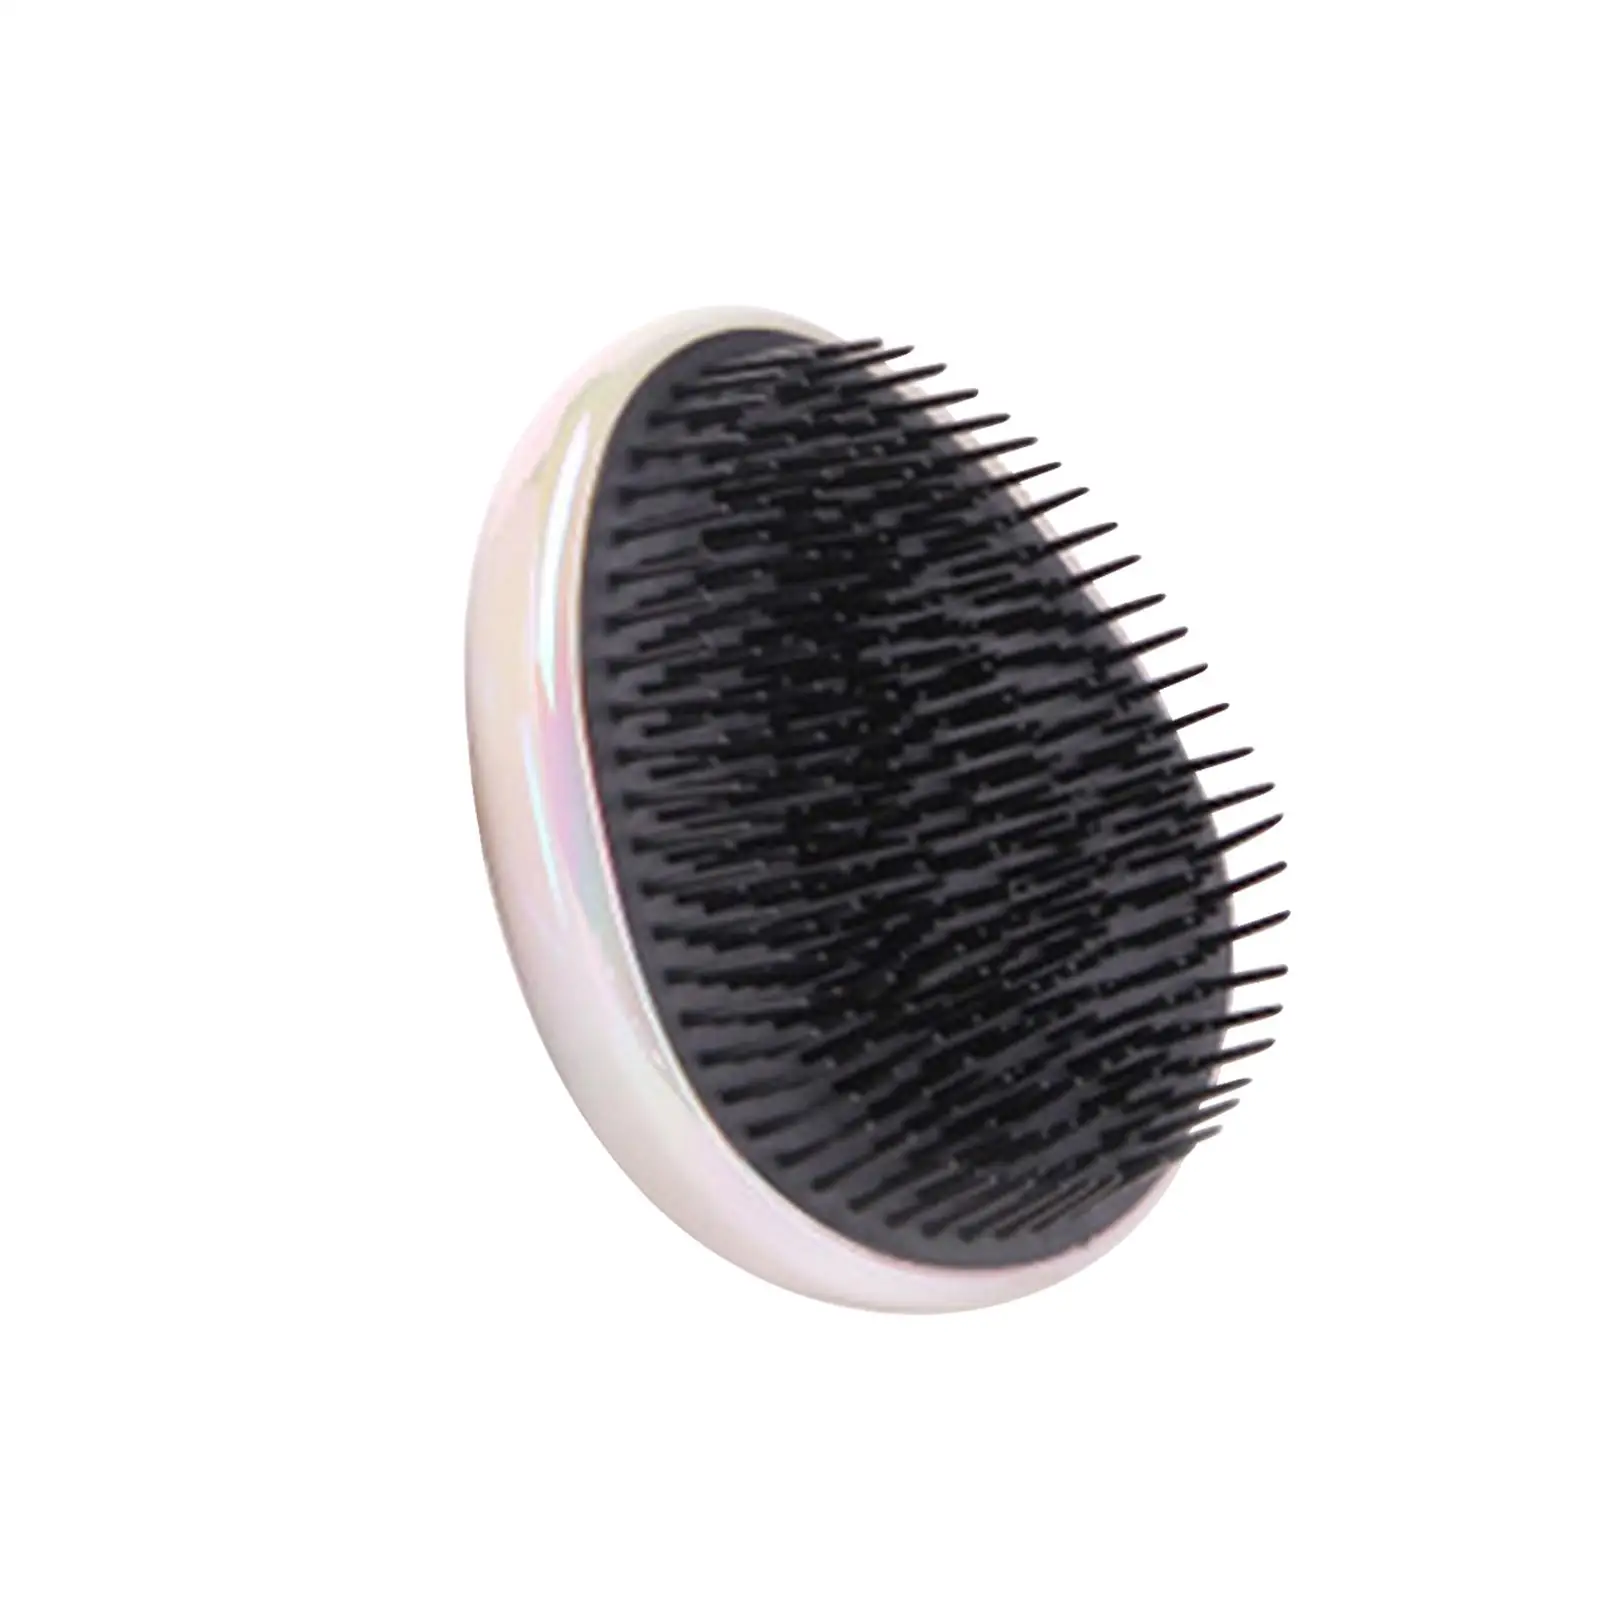 Portable Egg Shaped Hair Brush Air Cushion Massage Brush Scalp Massage Comb Hair Styling Tools for Wavy Curly Hair Women Adults